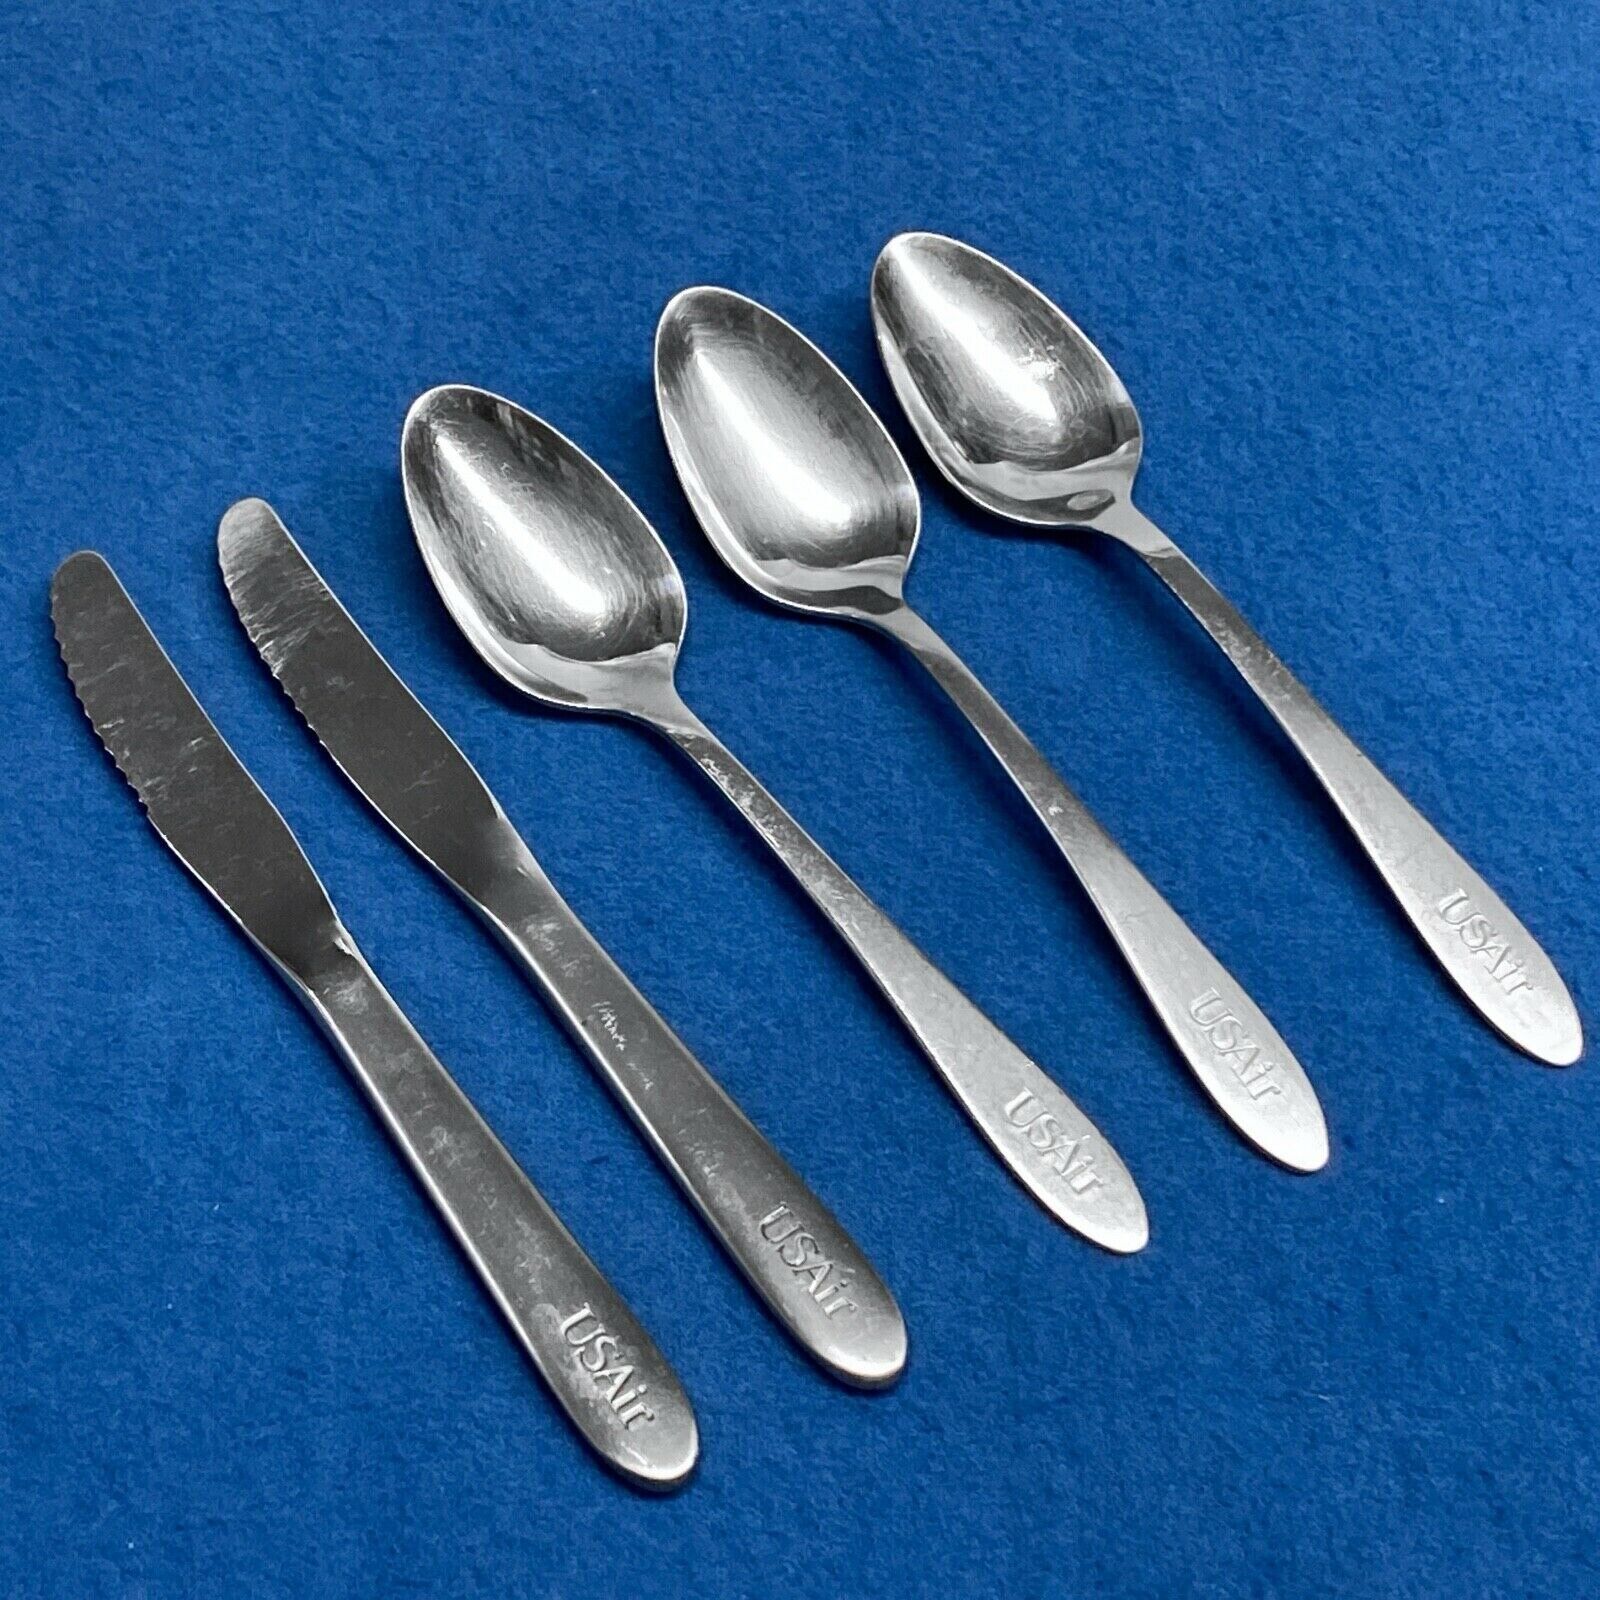 USAir Set of 2 Knives and 3 Teaspoons Stainless Airline Flatware Oneida  US Air